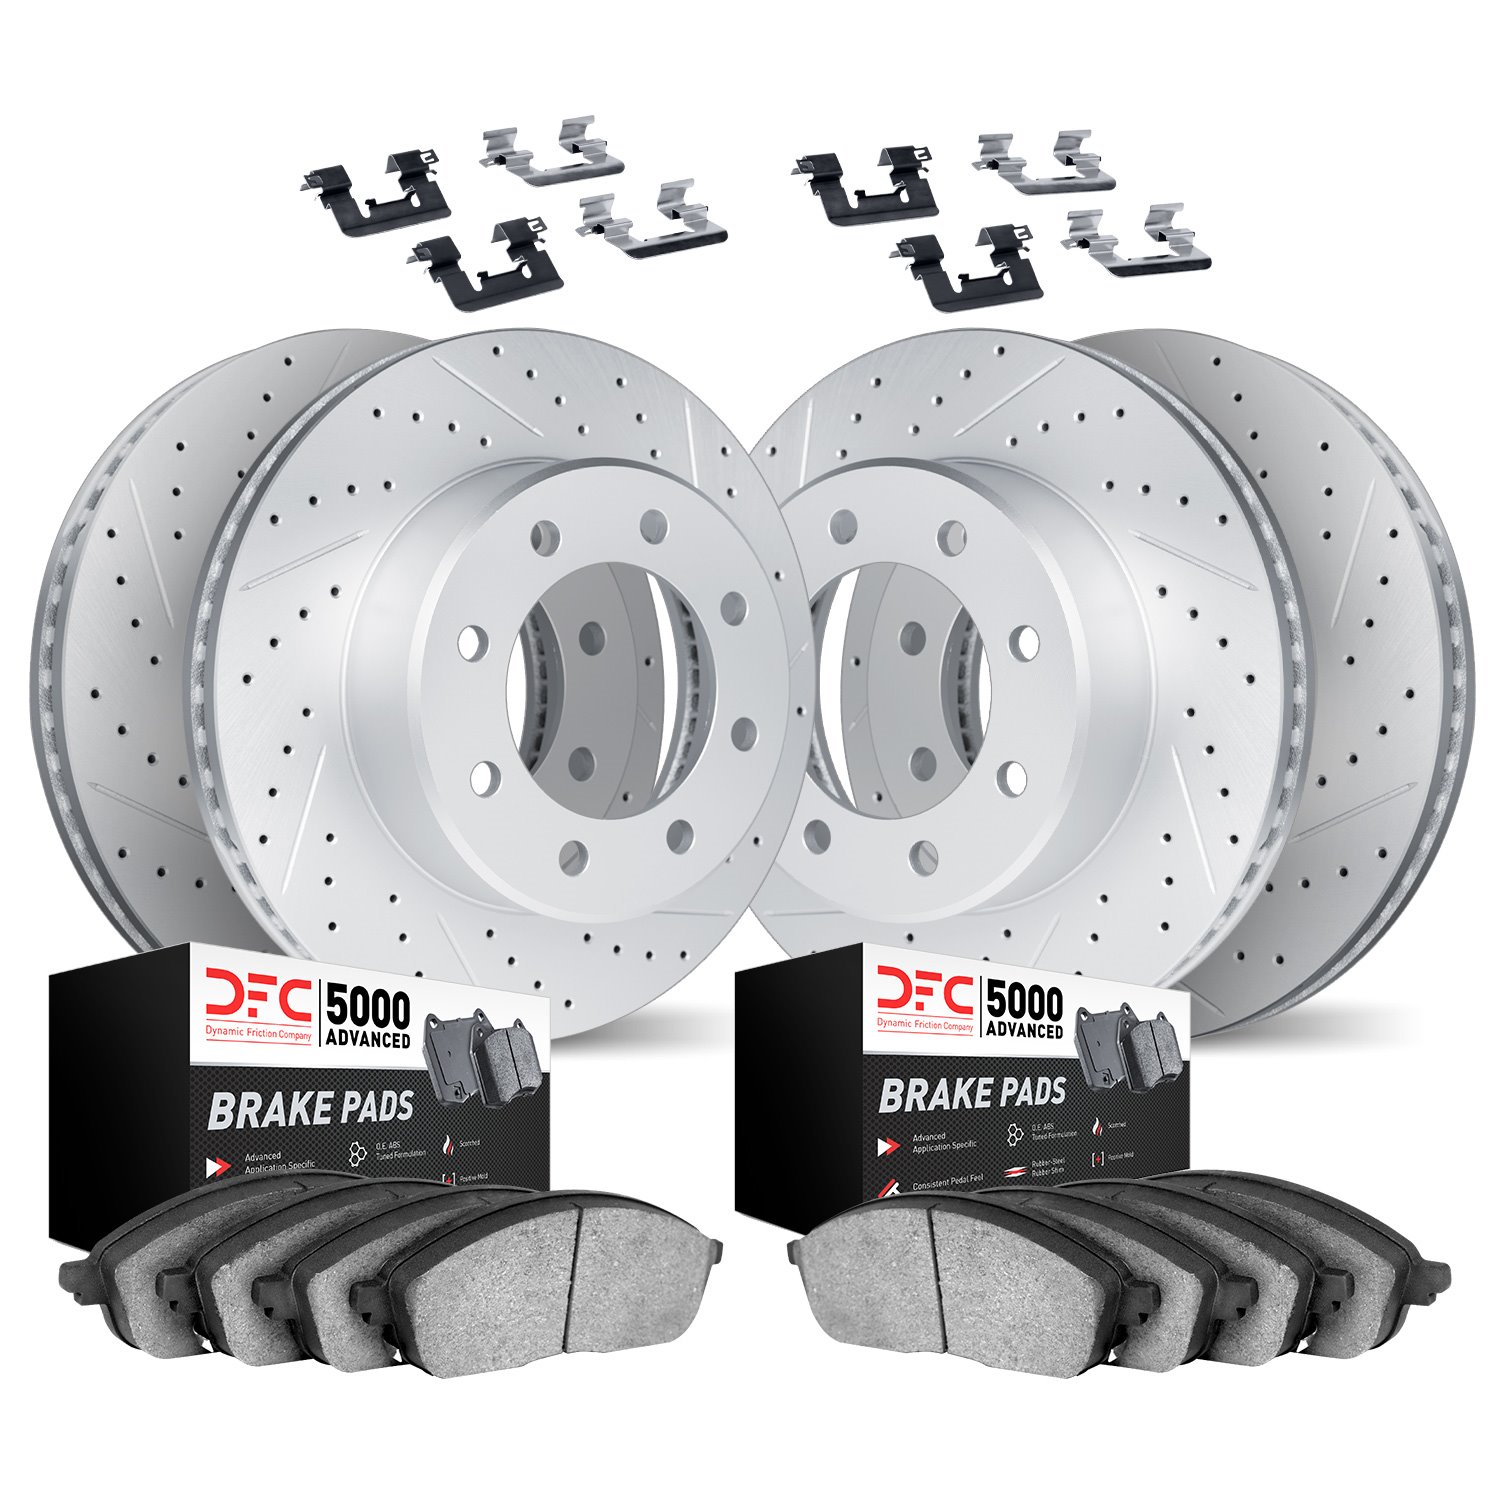 2514-48034 Geoperformance Drilled/Slotted Rotors w/5000 Advanced Brake Pads Kit & Hardware, 2011-2019 GM, Position: Front and Re